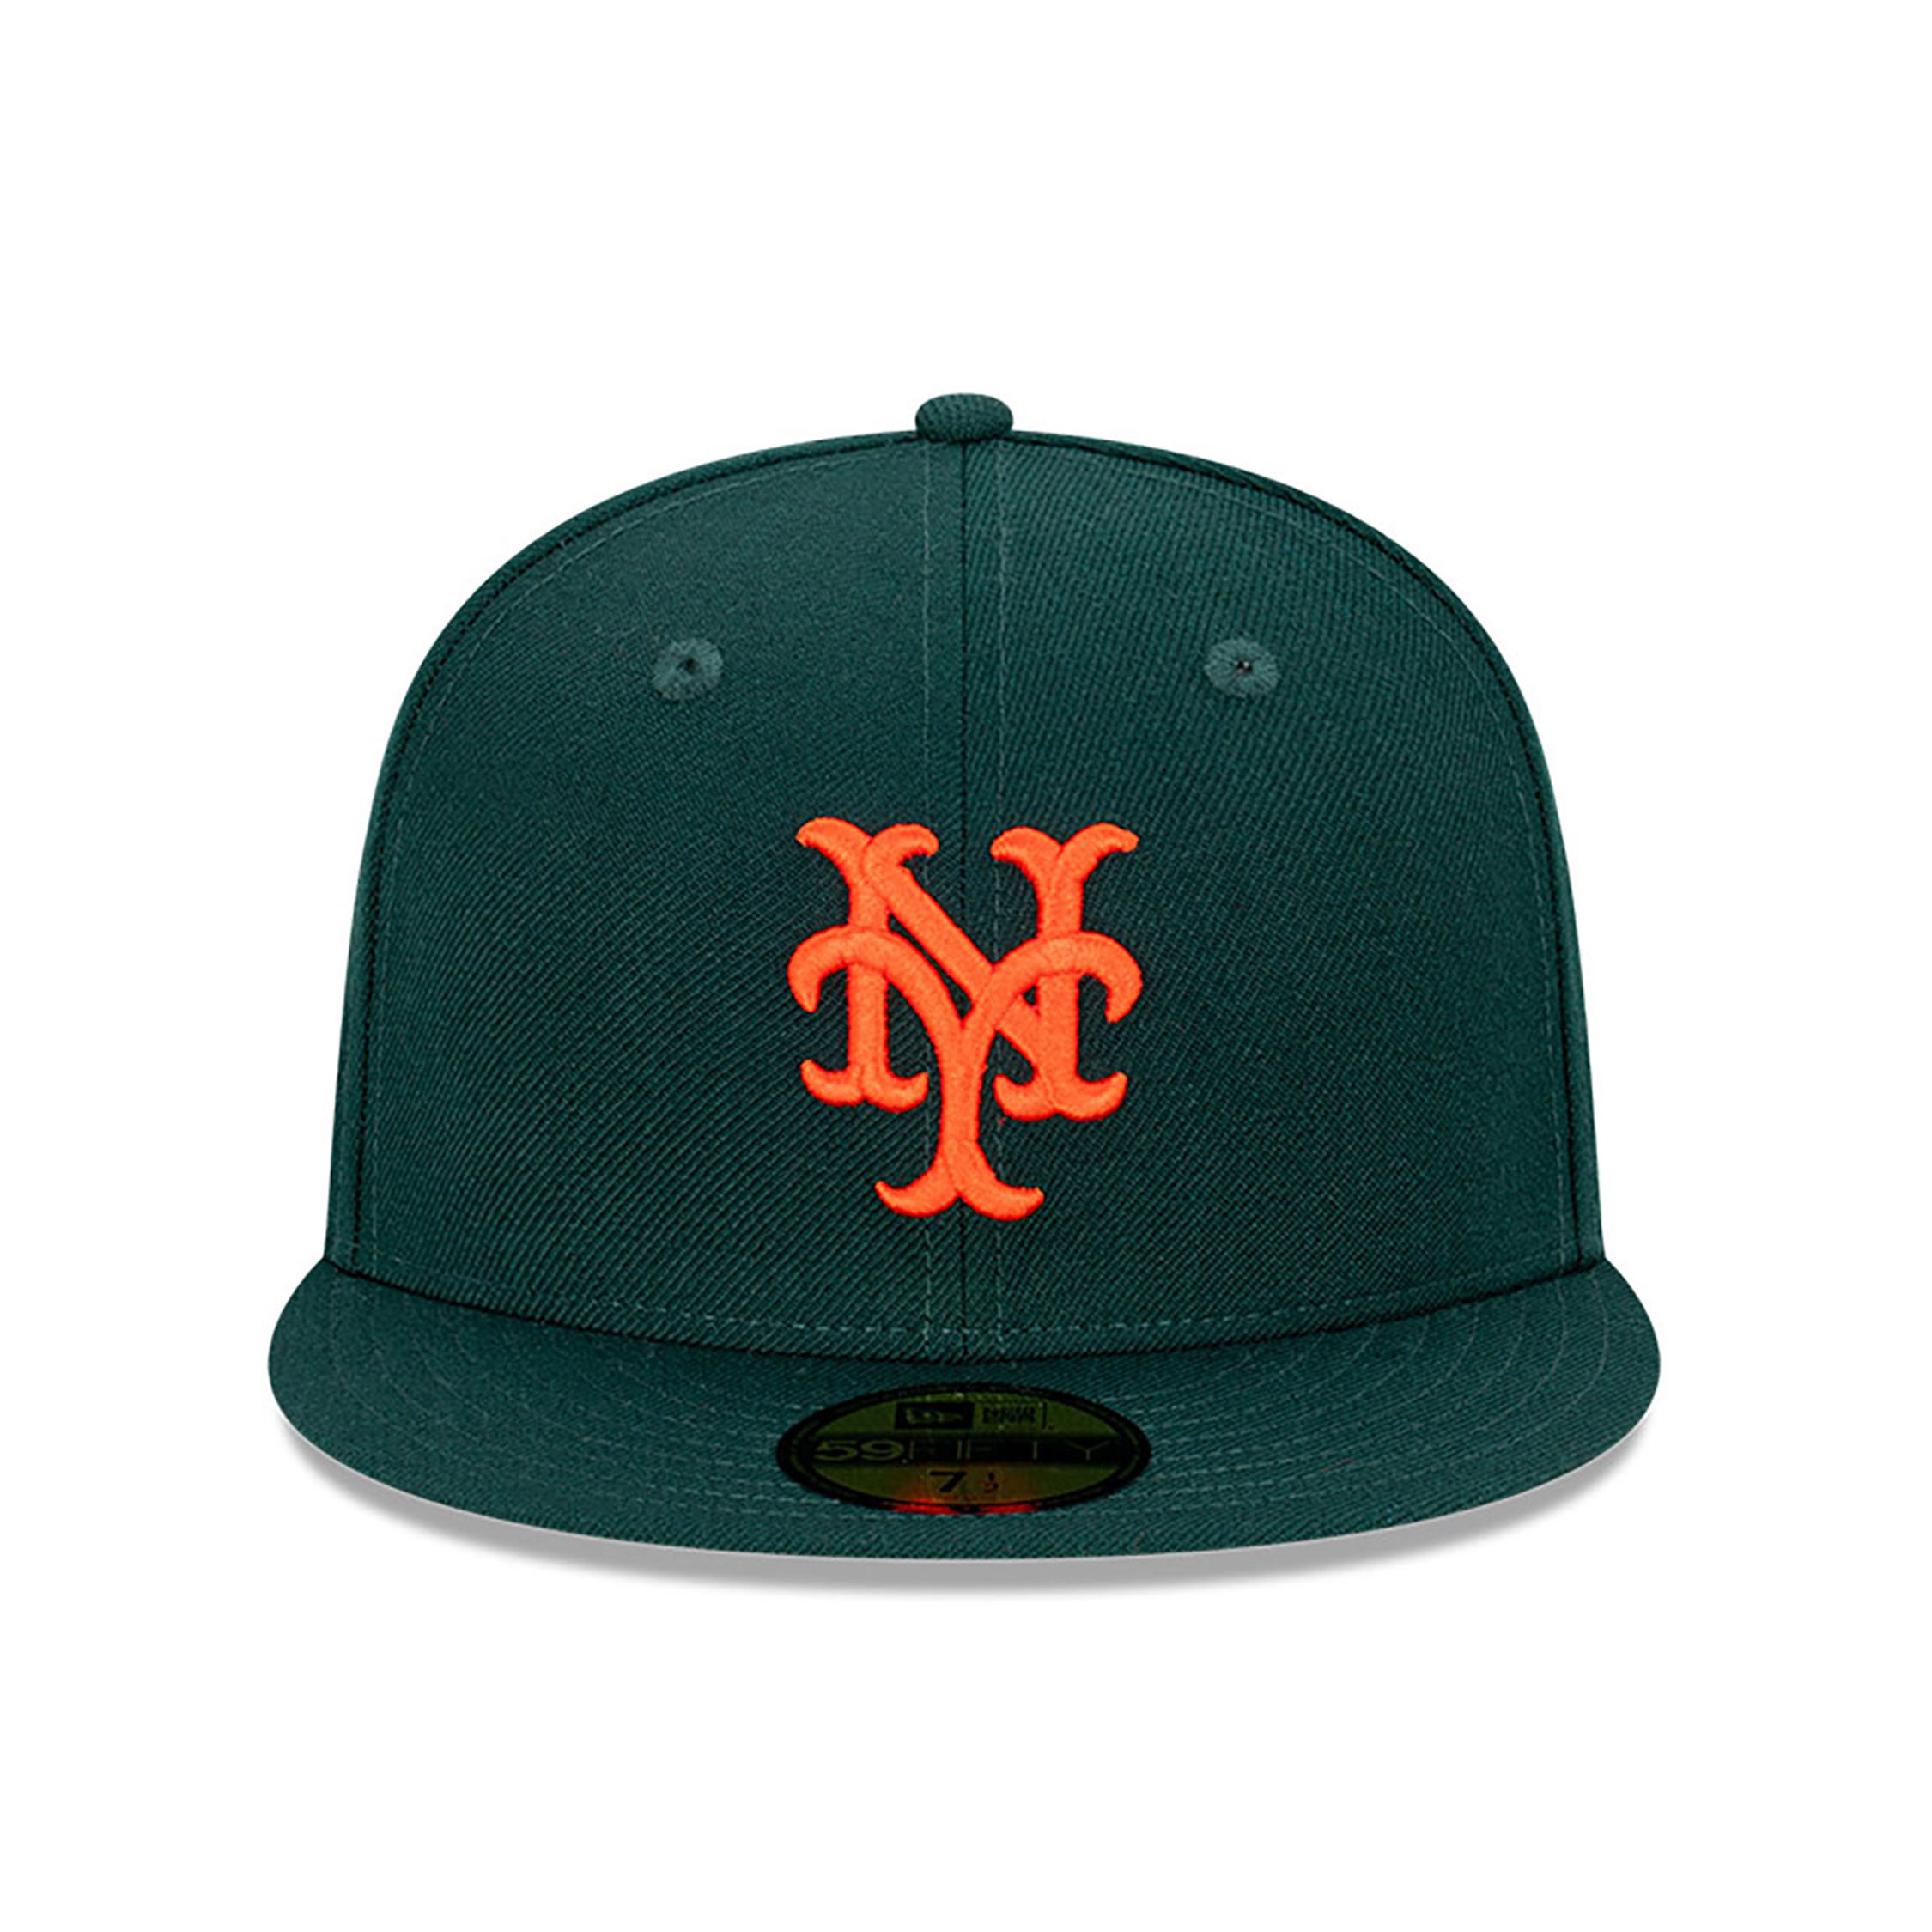 New York Mets Regal Greens Dark Green 59FIFTY Fitted Cap